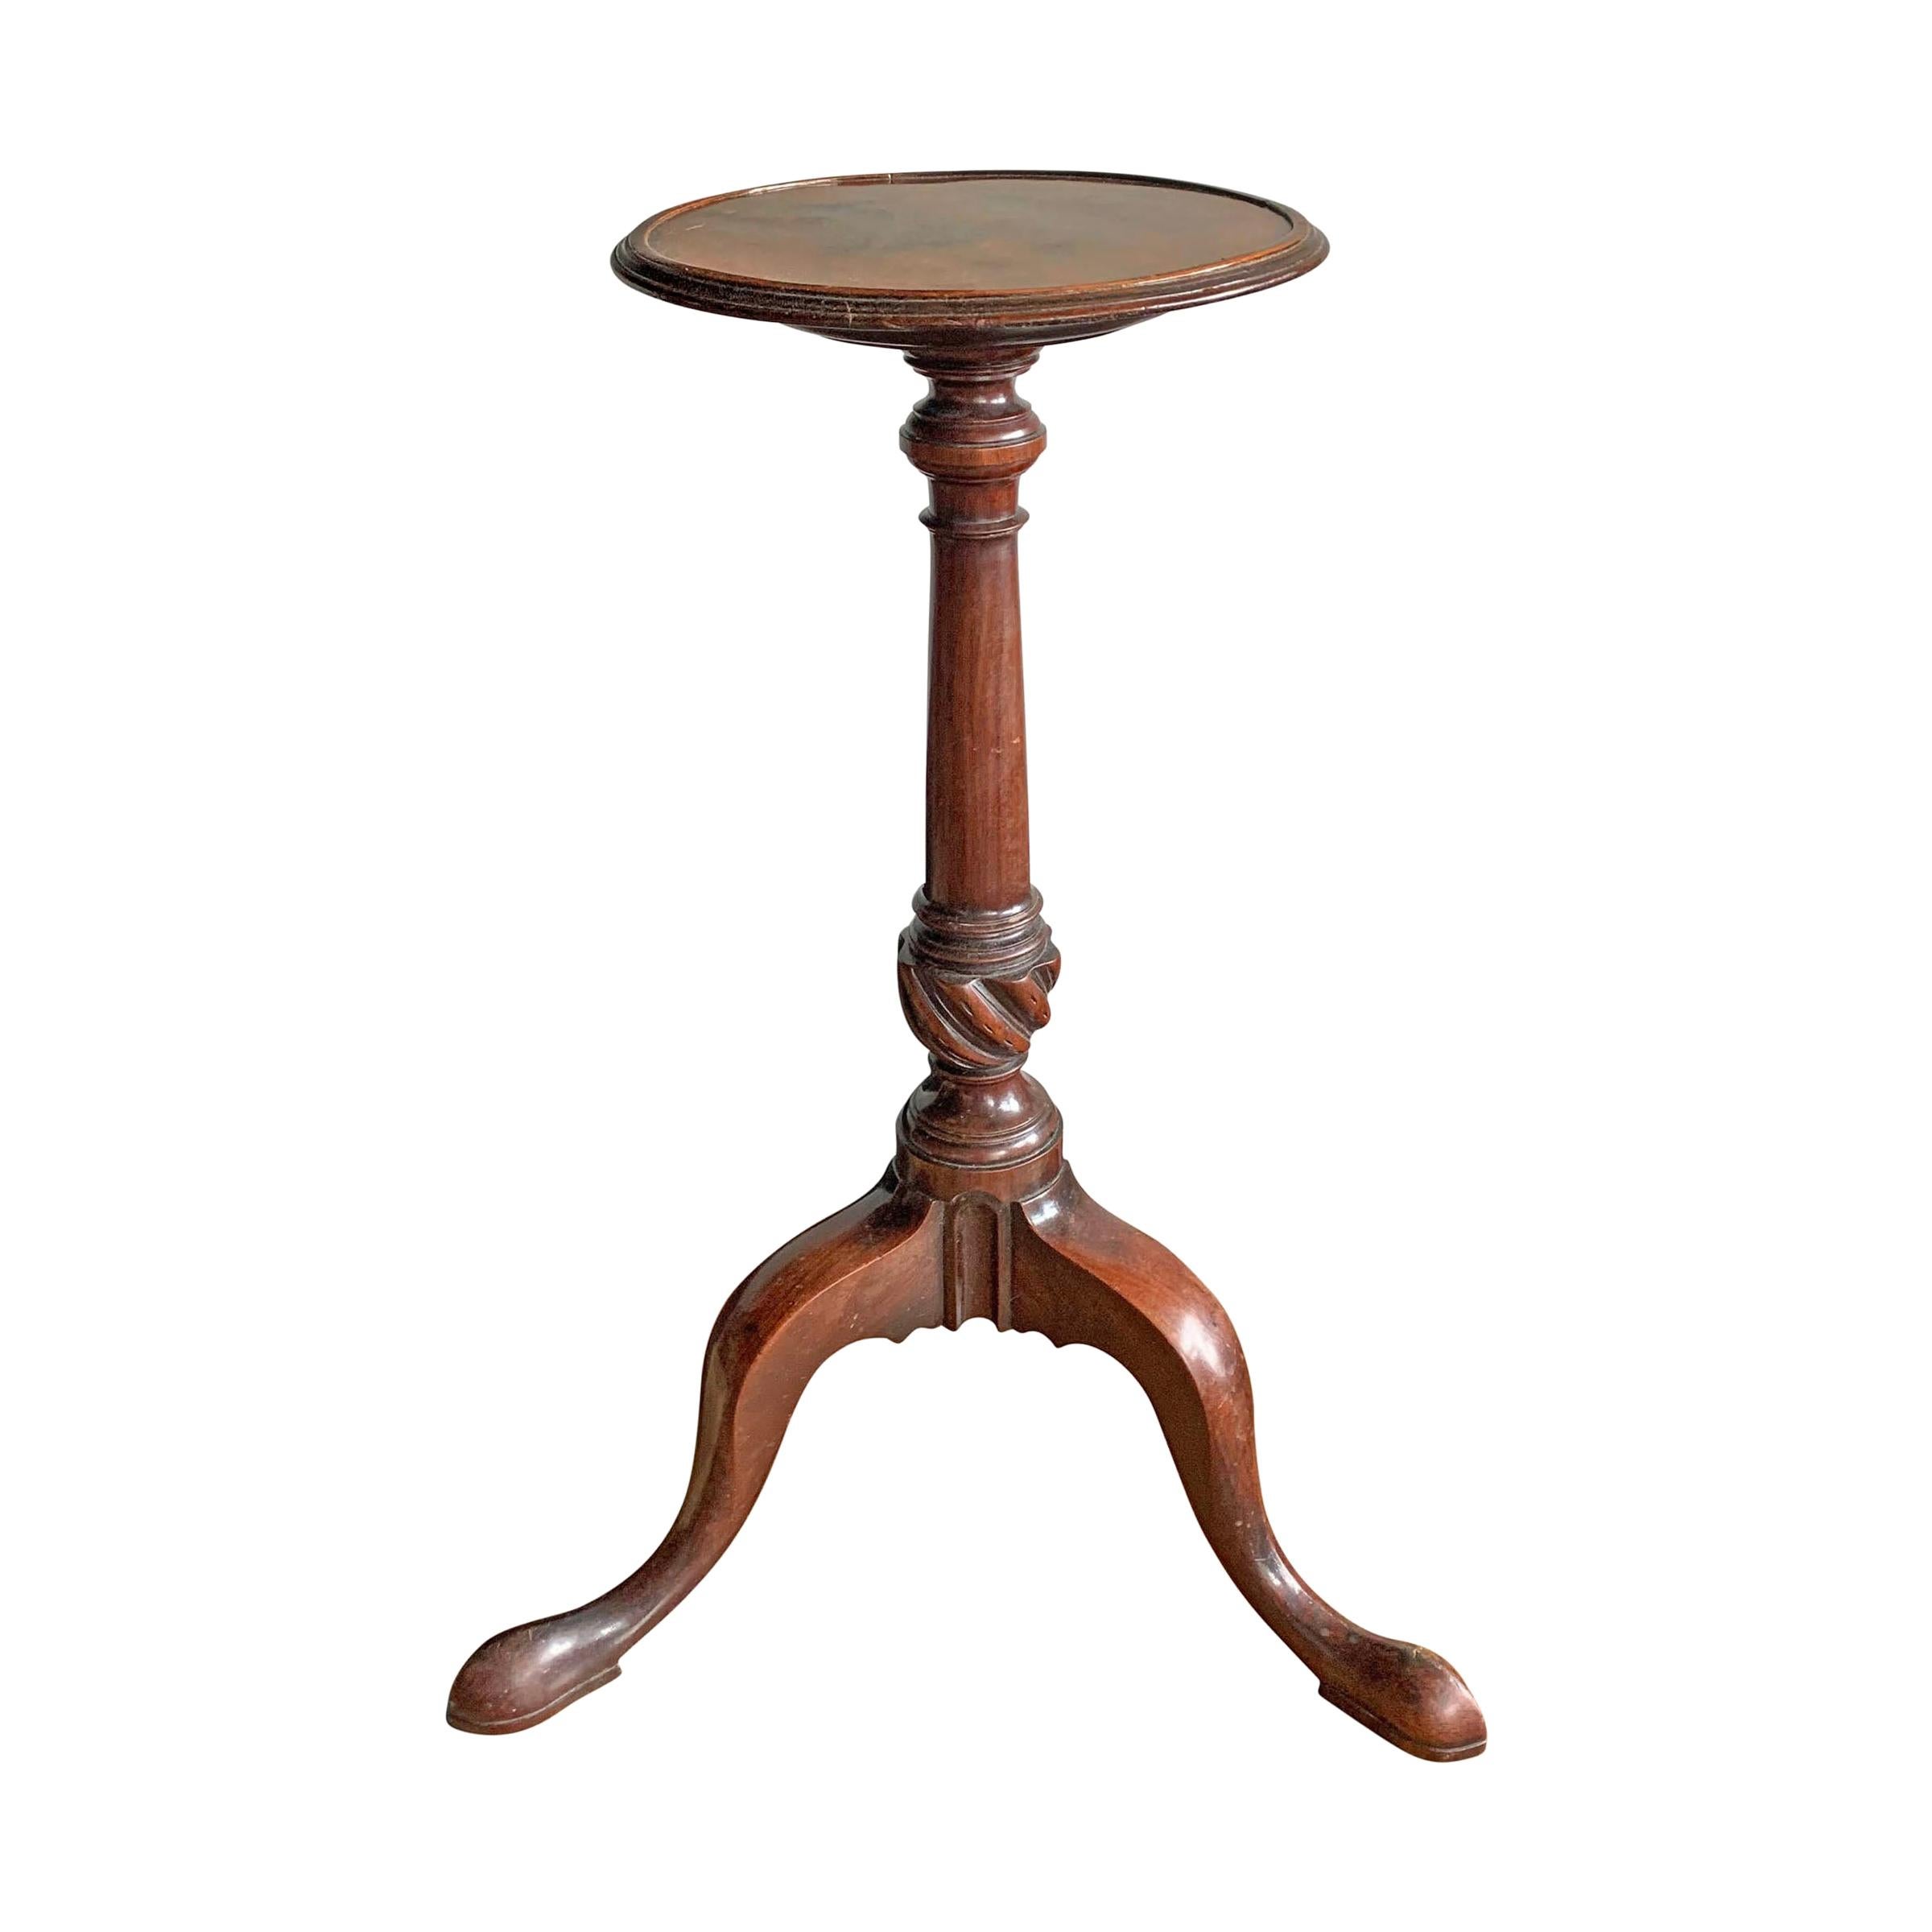 18th Century American Candle Stand